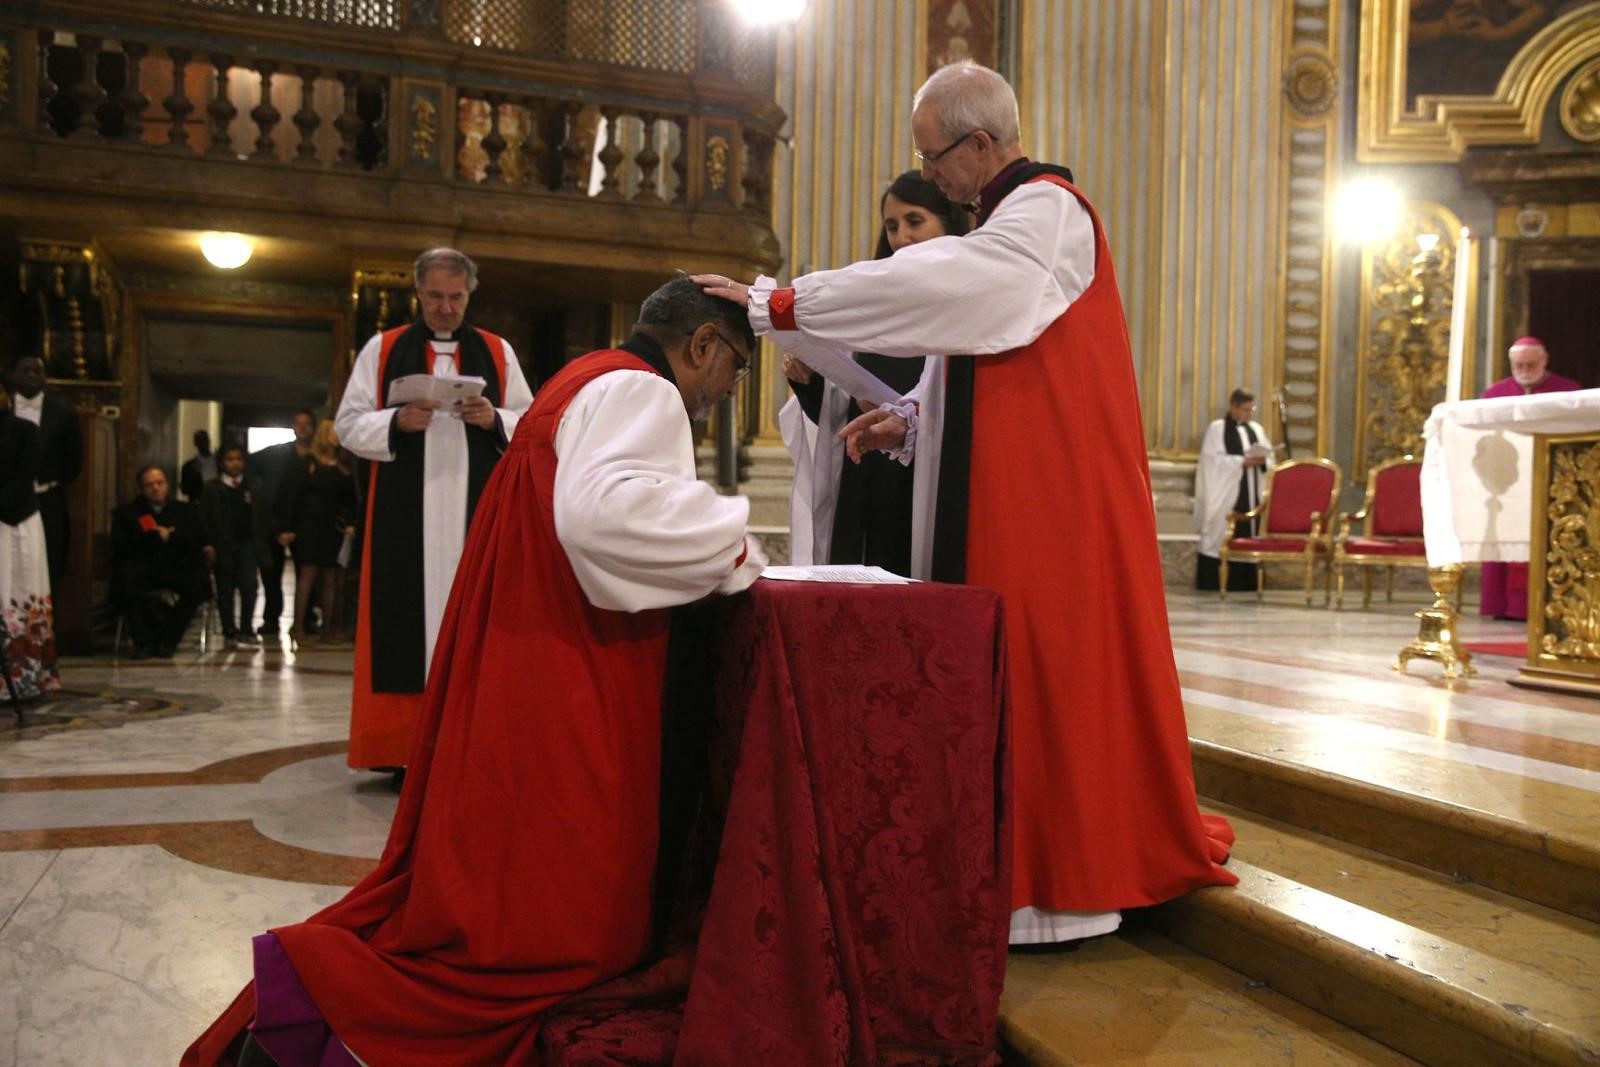 Archbishop Ian Ernest being commissioned as Director of the Centre by the Archbishop of Canterbury, the Most Revd Justin Welby, as Bishop Michael Burrows looks on in November 2019.